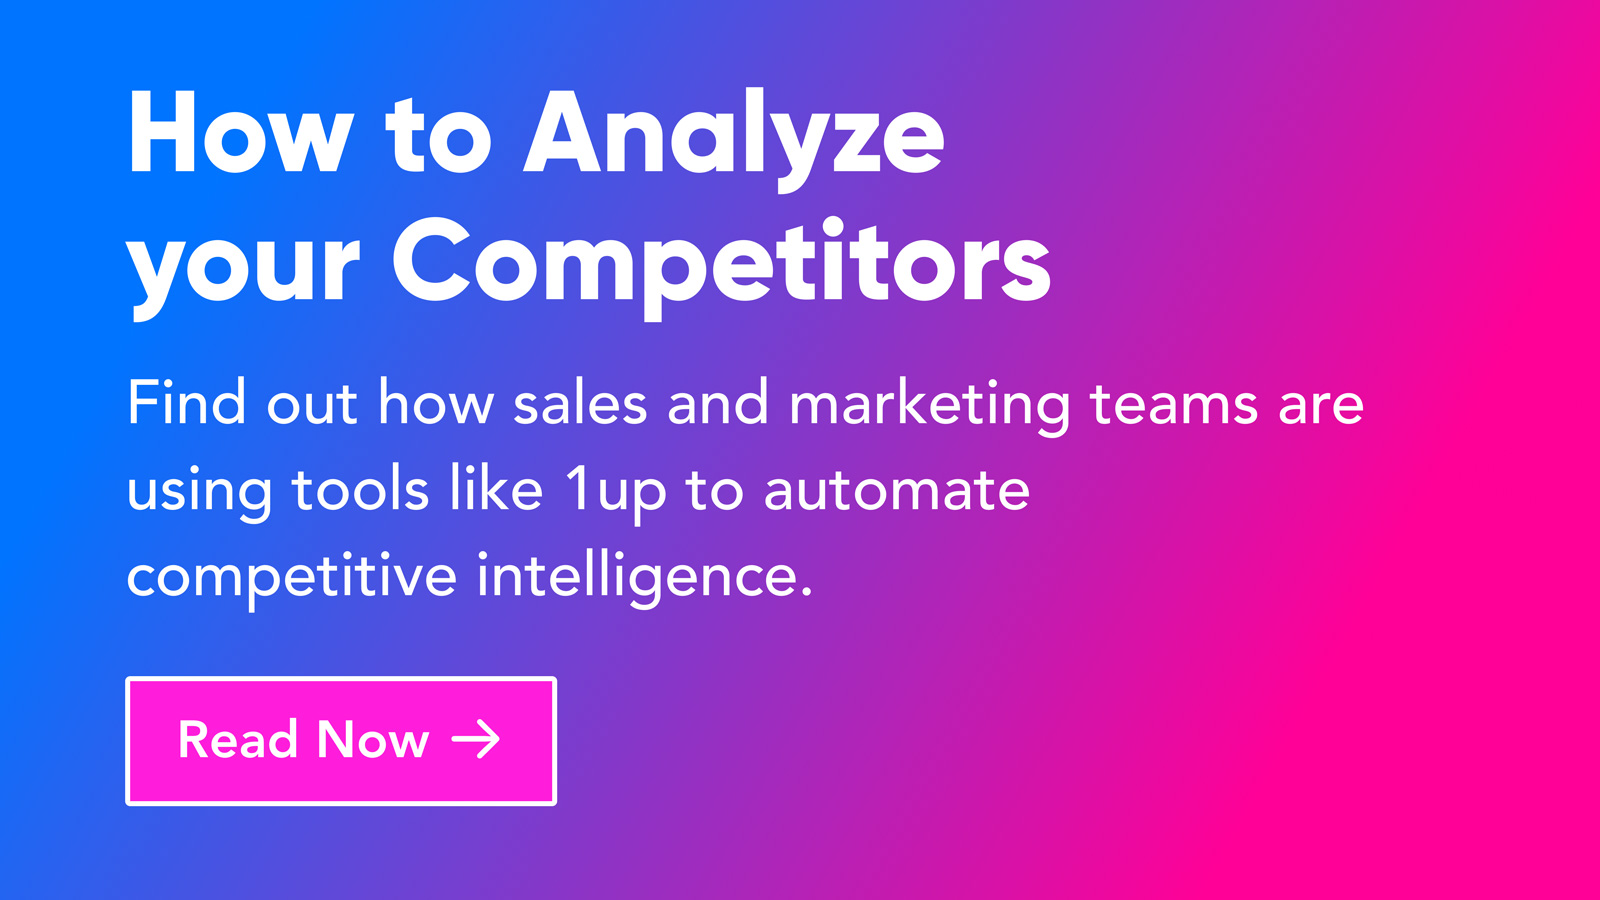 How to Analyze your Competitors